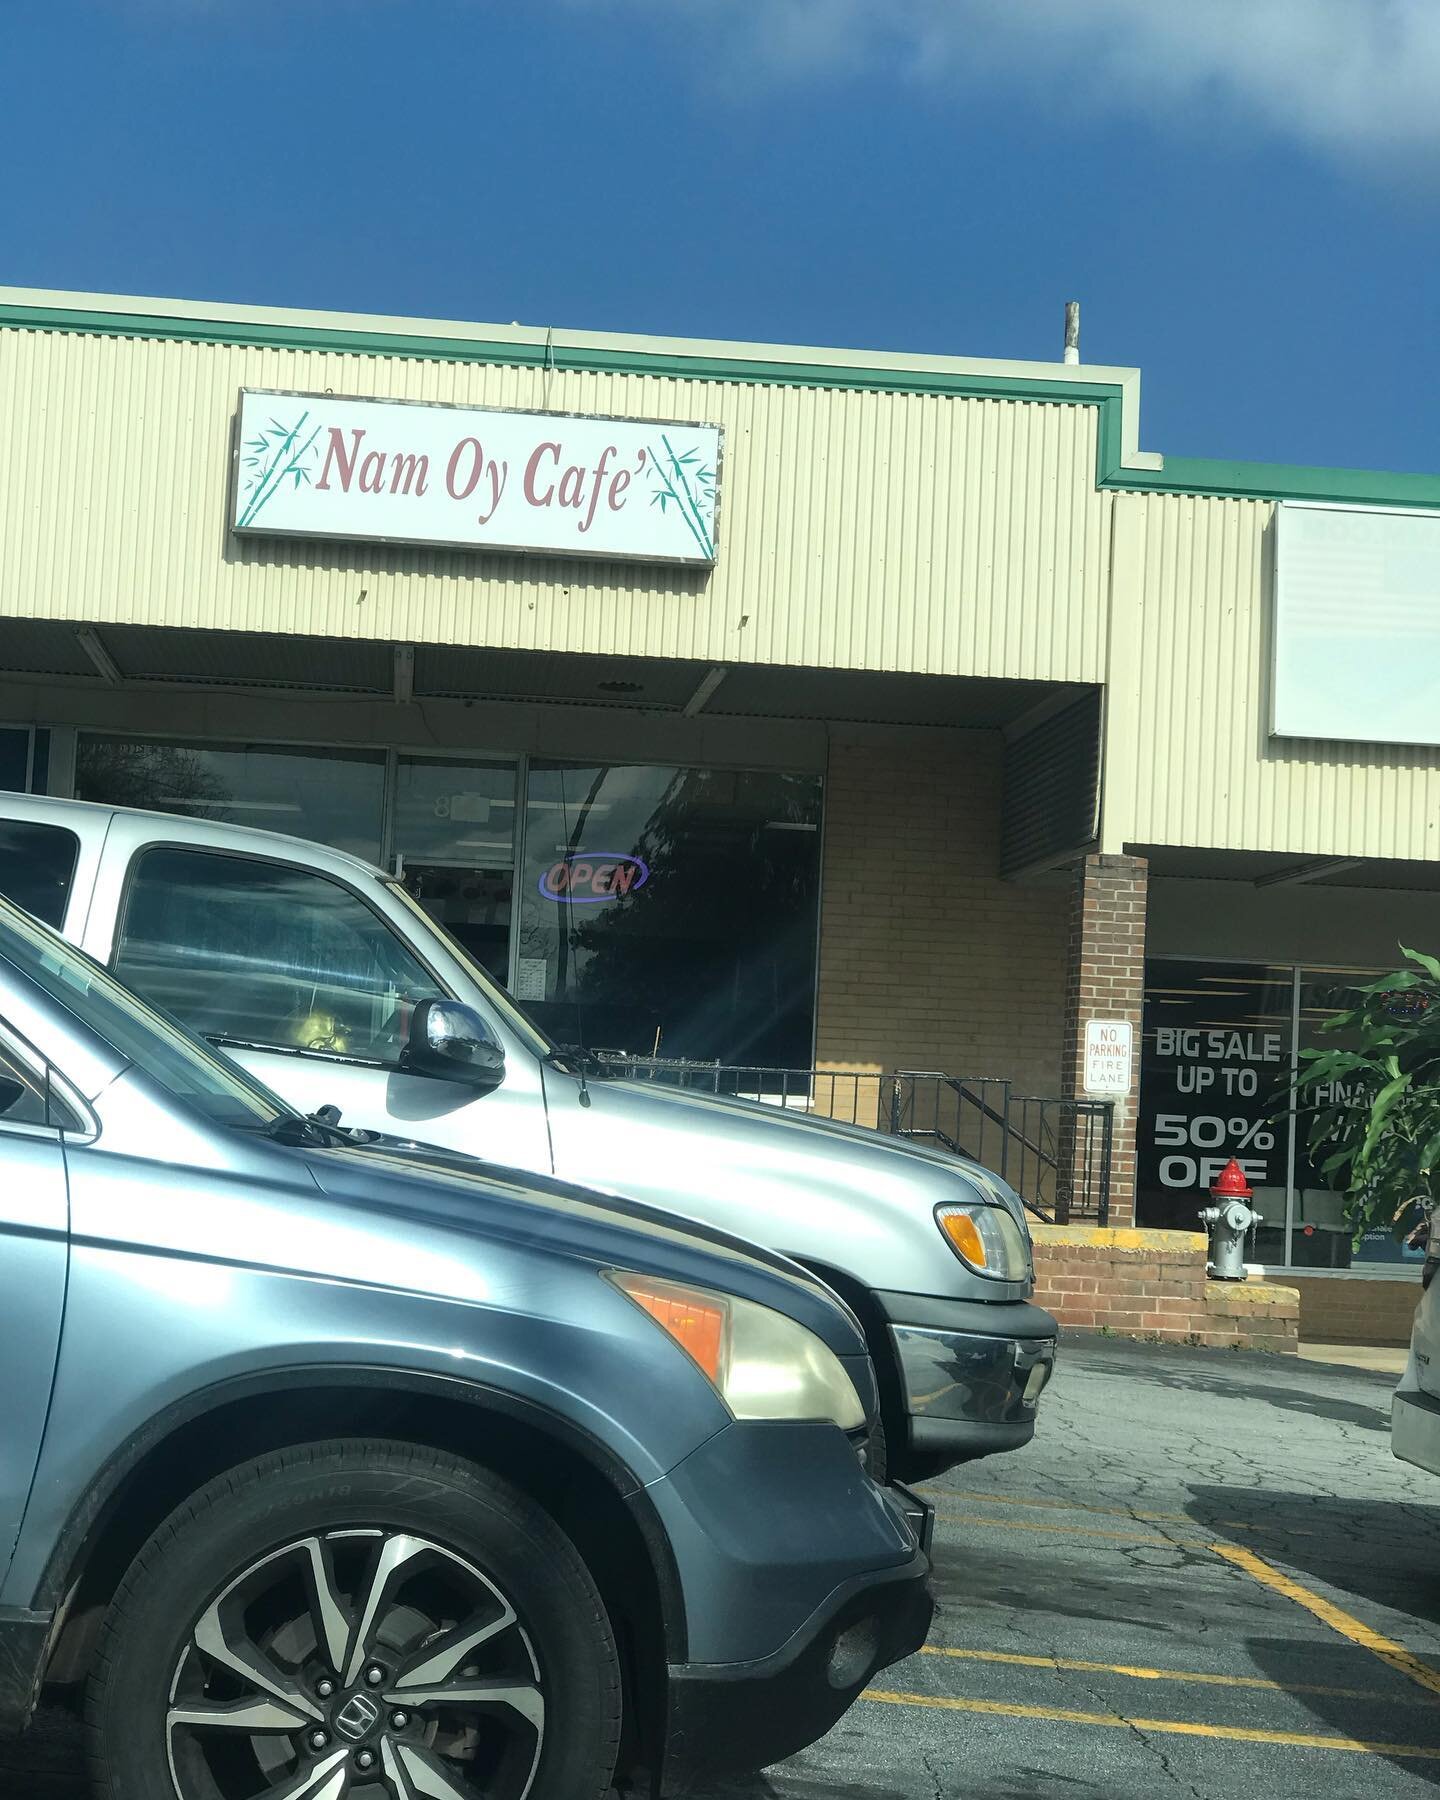 So bummed that this place is closing and I just found out about Nam Oy Caf&eacute;. I had seen this listed the other day and decided to go since they mentioned that they were closing for good tomorrow. 

Got up early and went about an hour after they